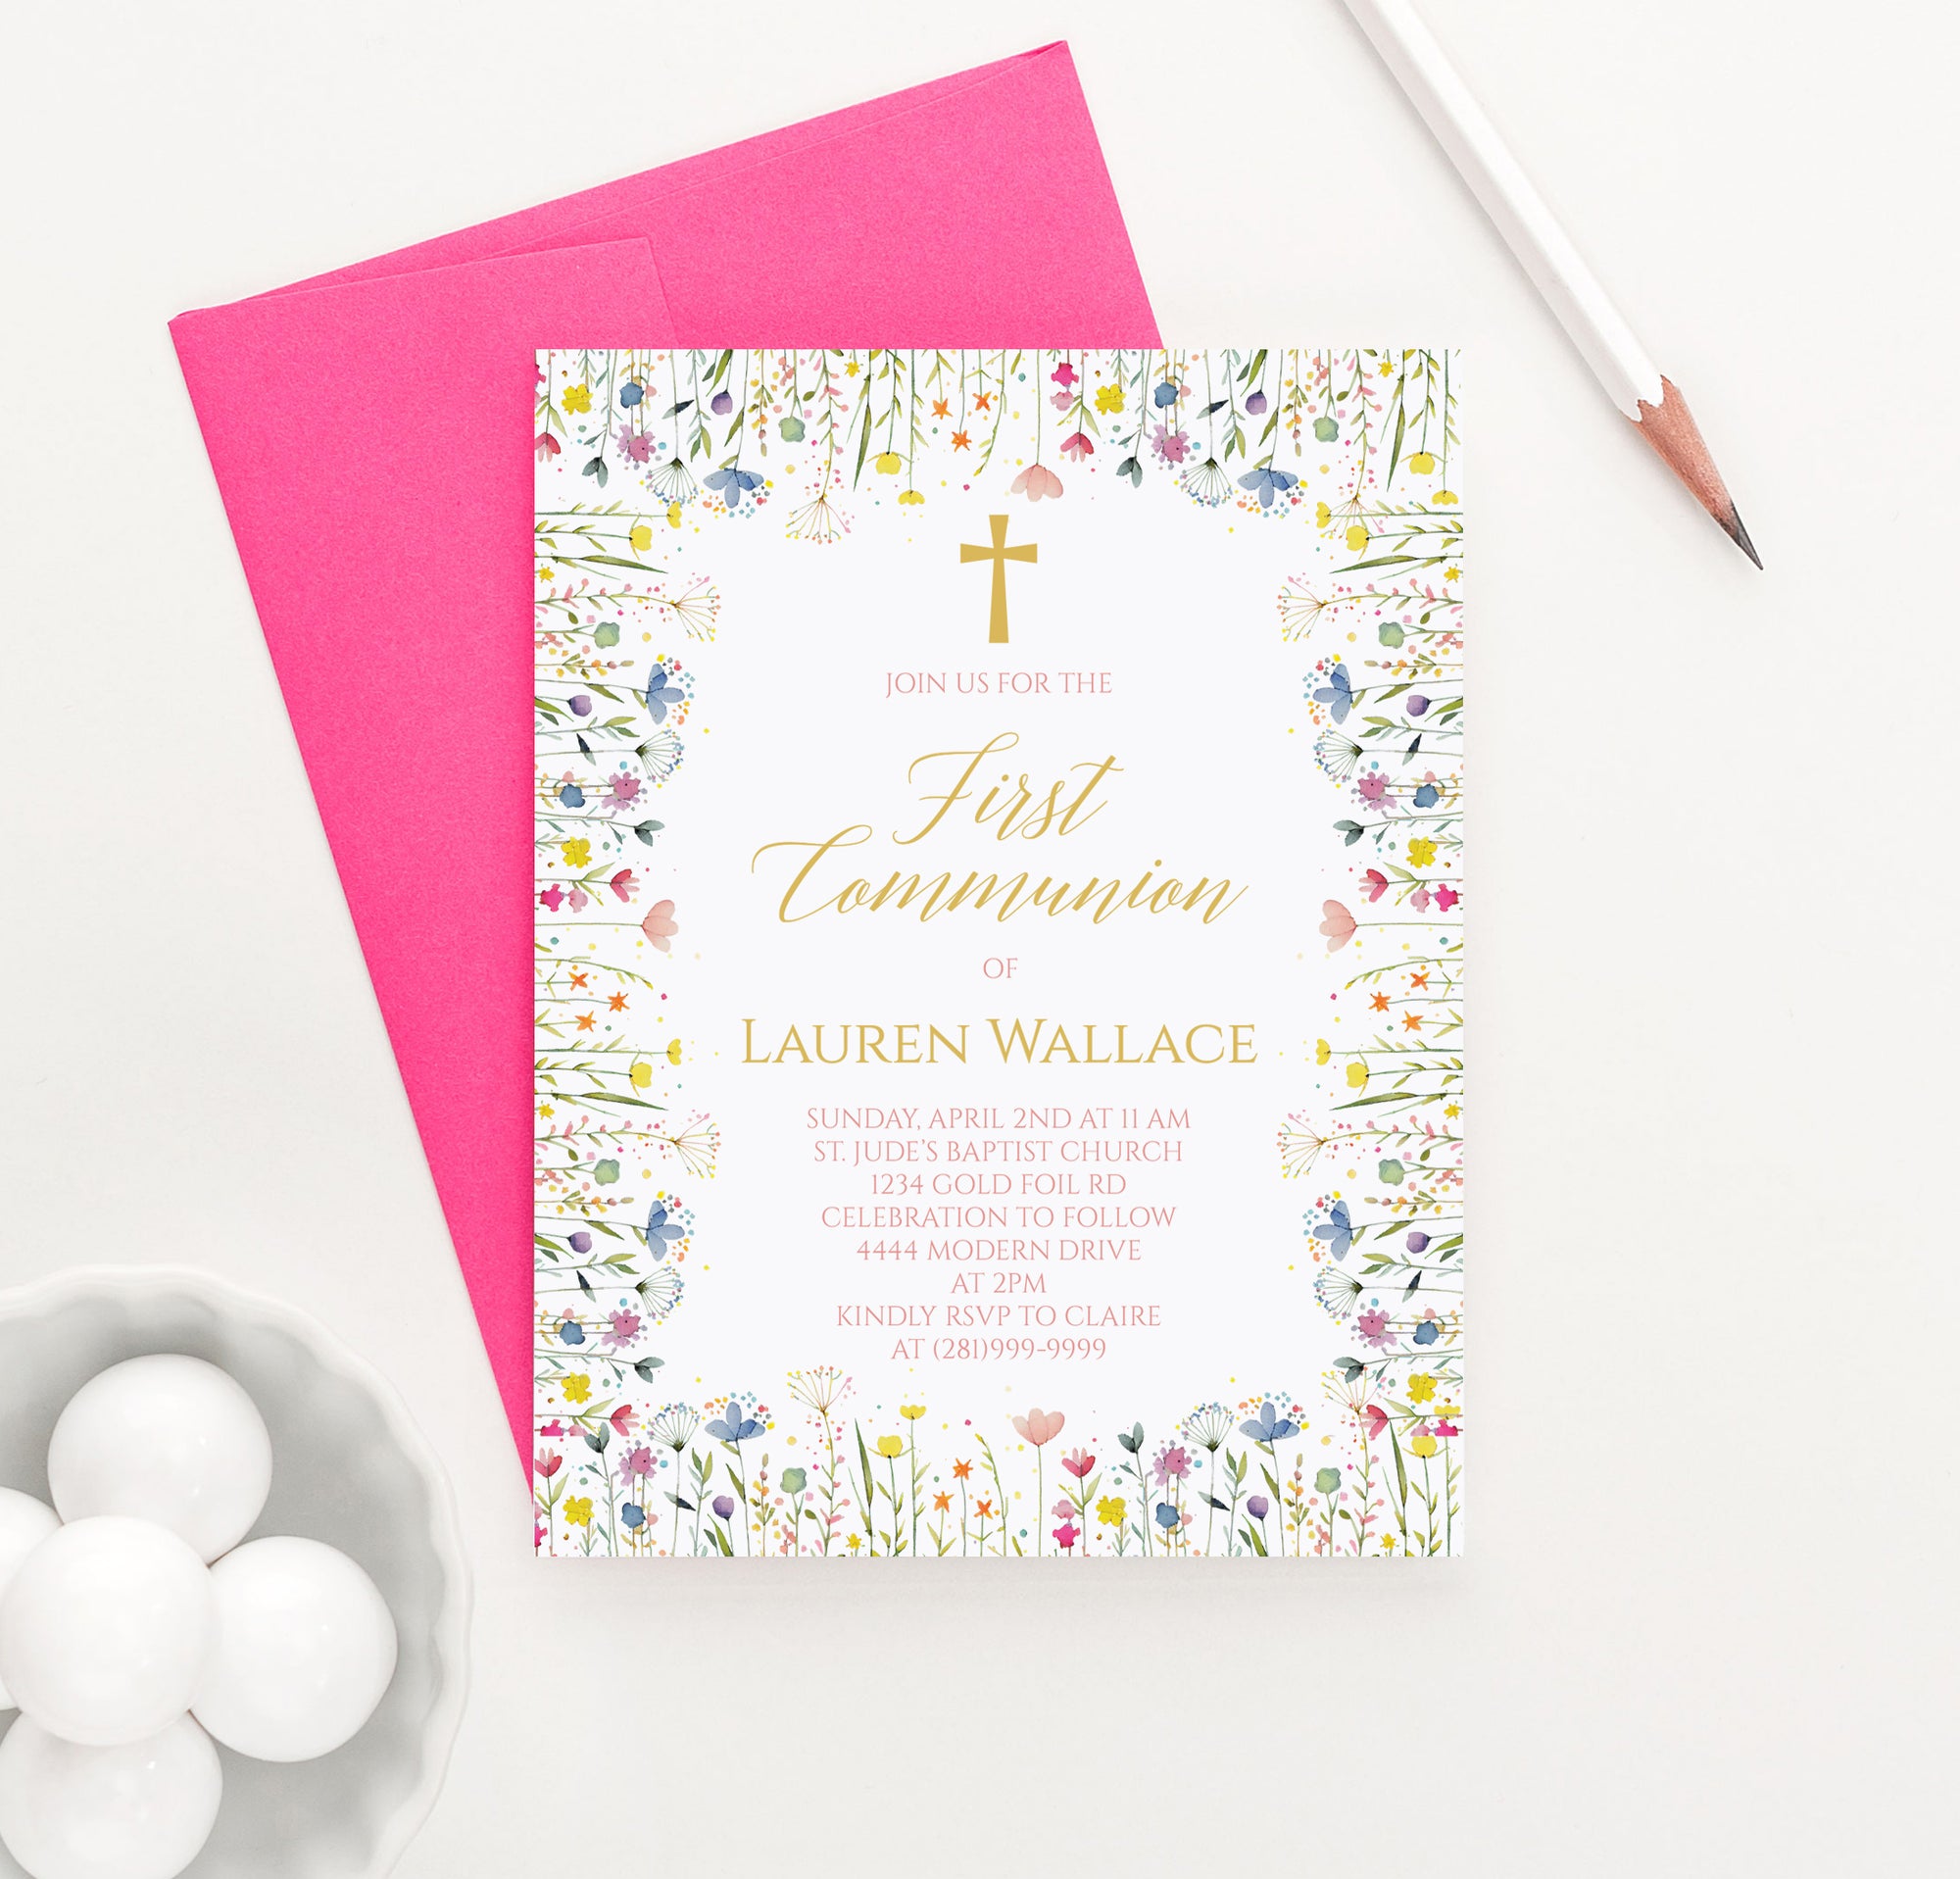 Watercolor Wildflower Invitation To Holy Communion